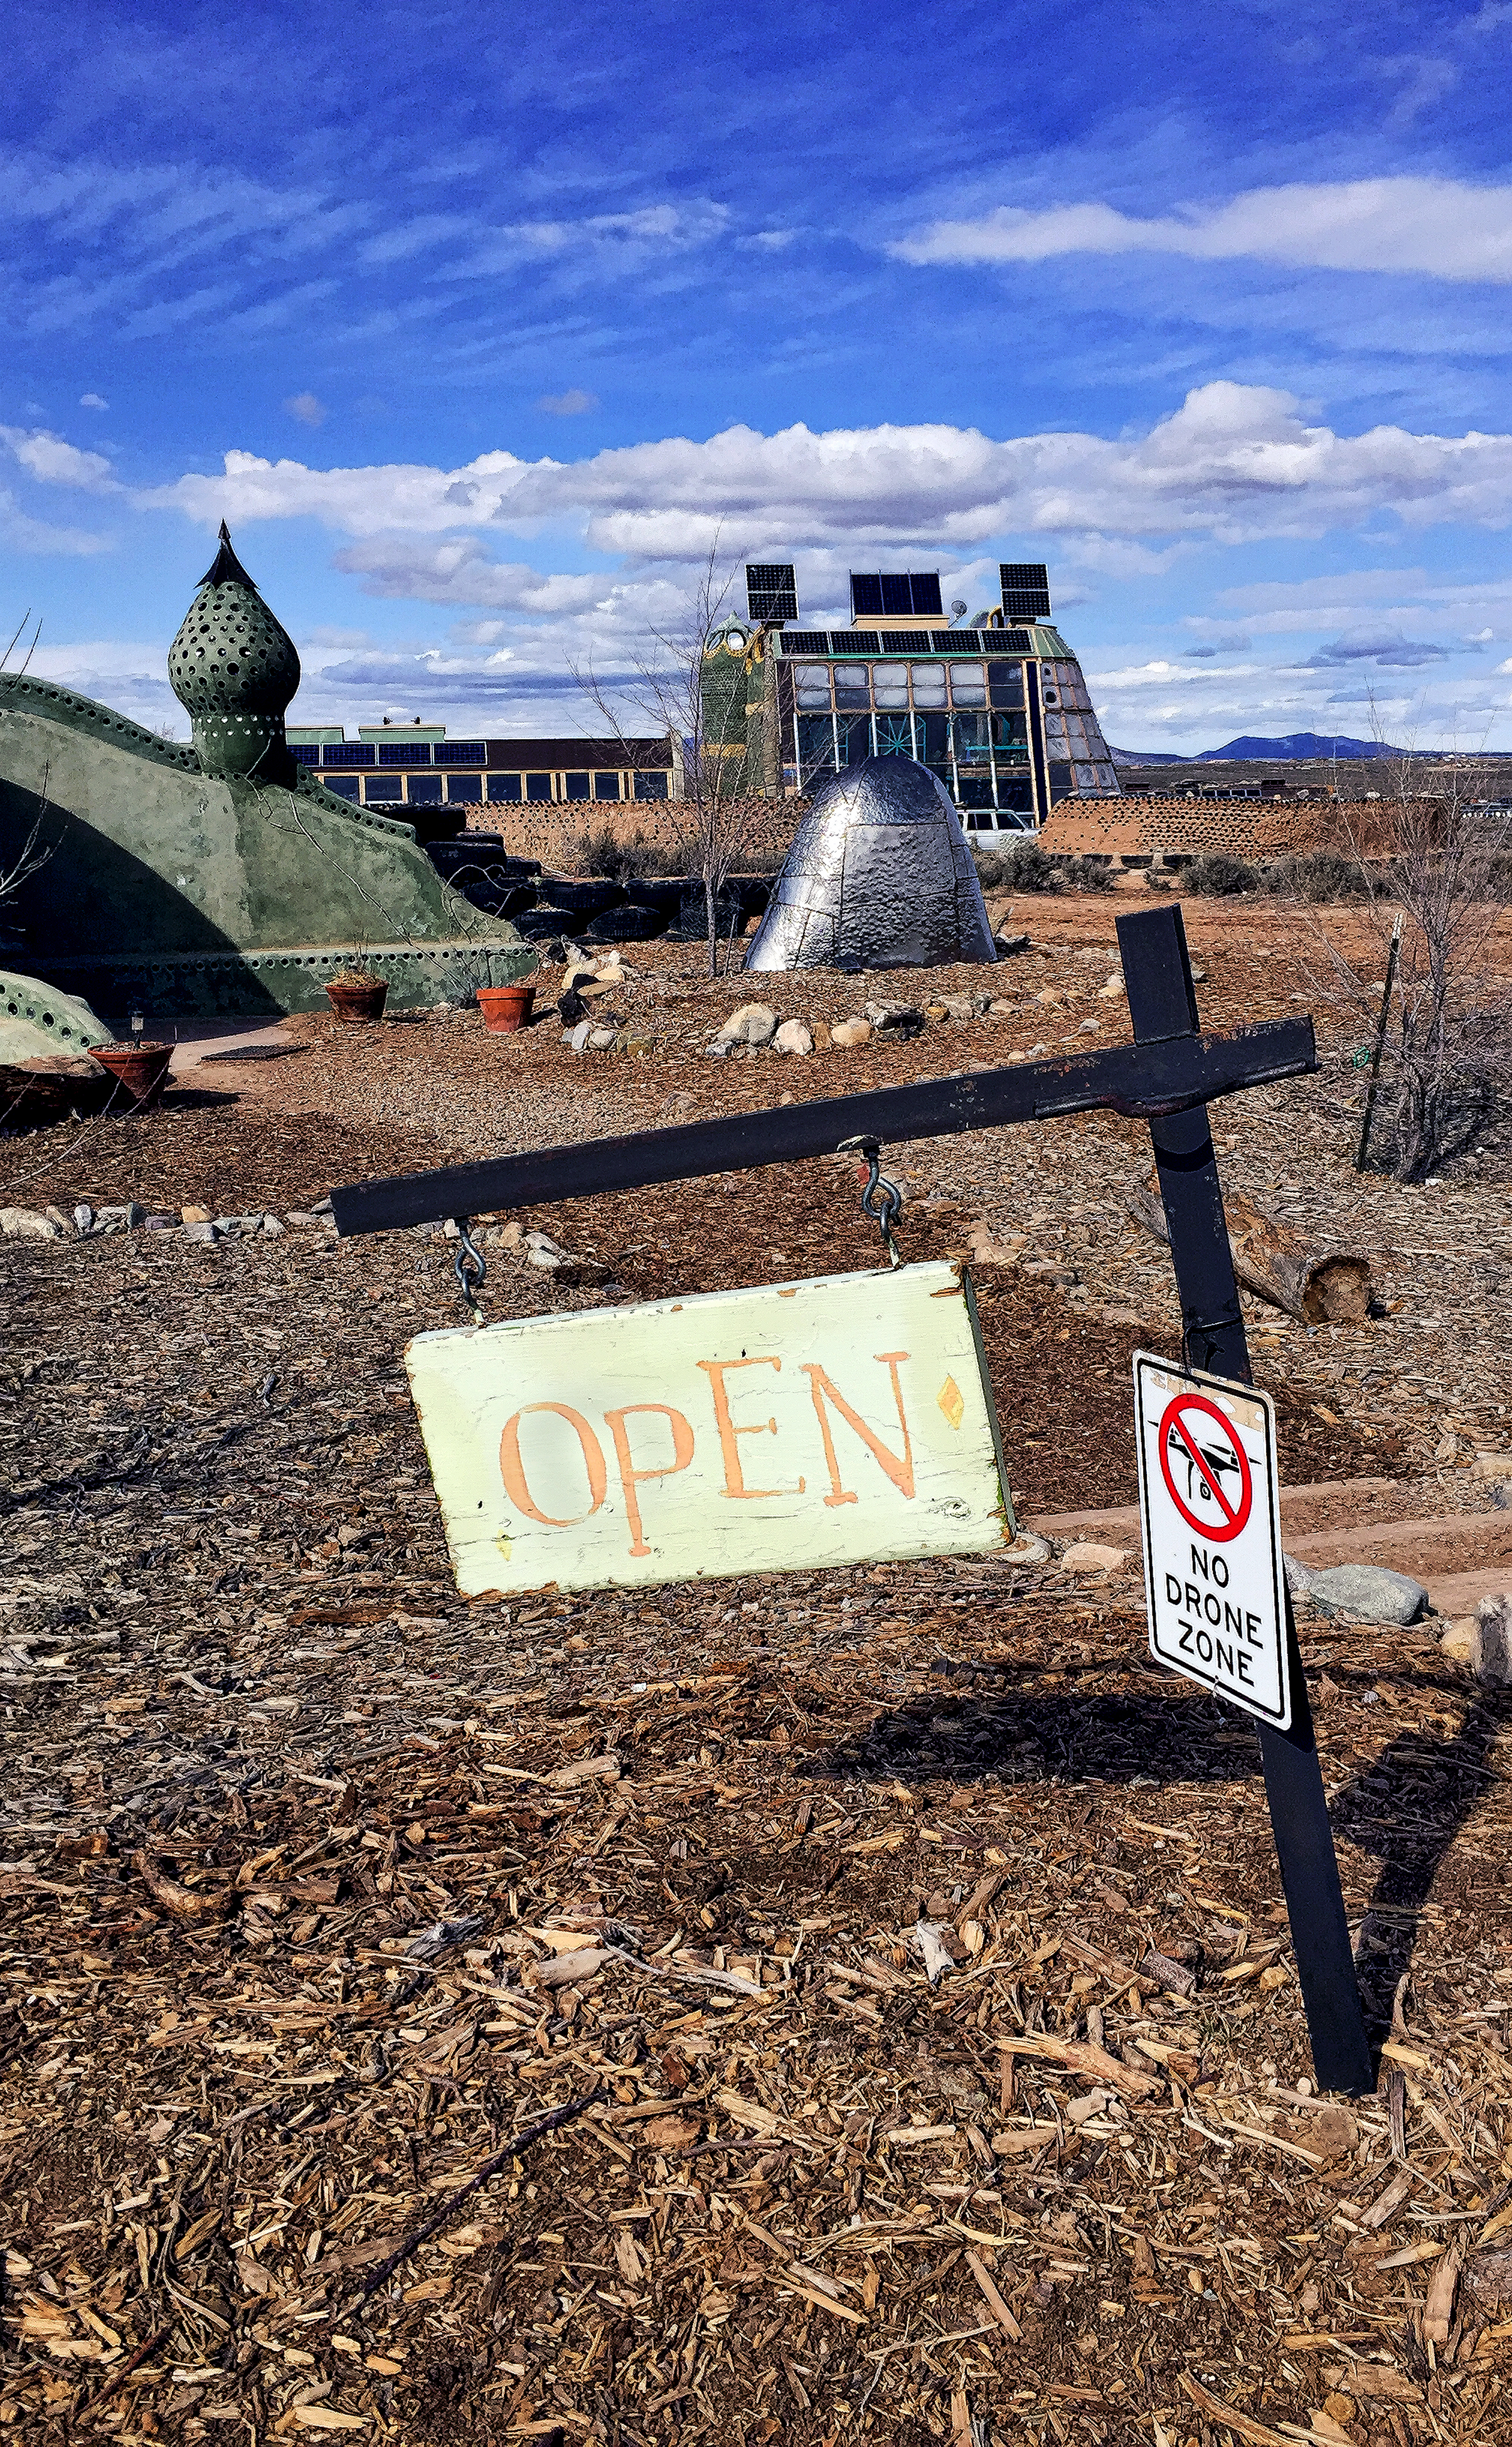 These Otherworldly “Earthships” Offer Visitors Unusual, Off-the-Grid Accommodations